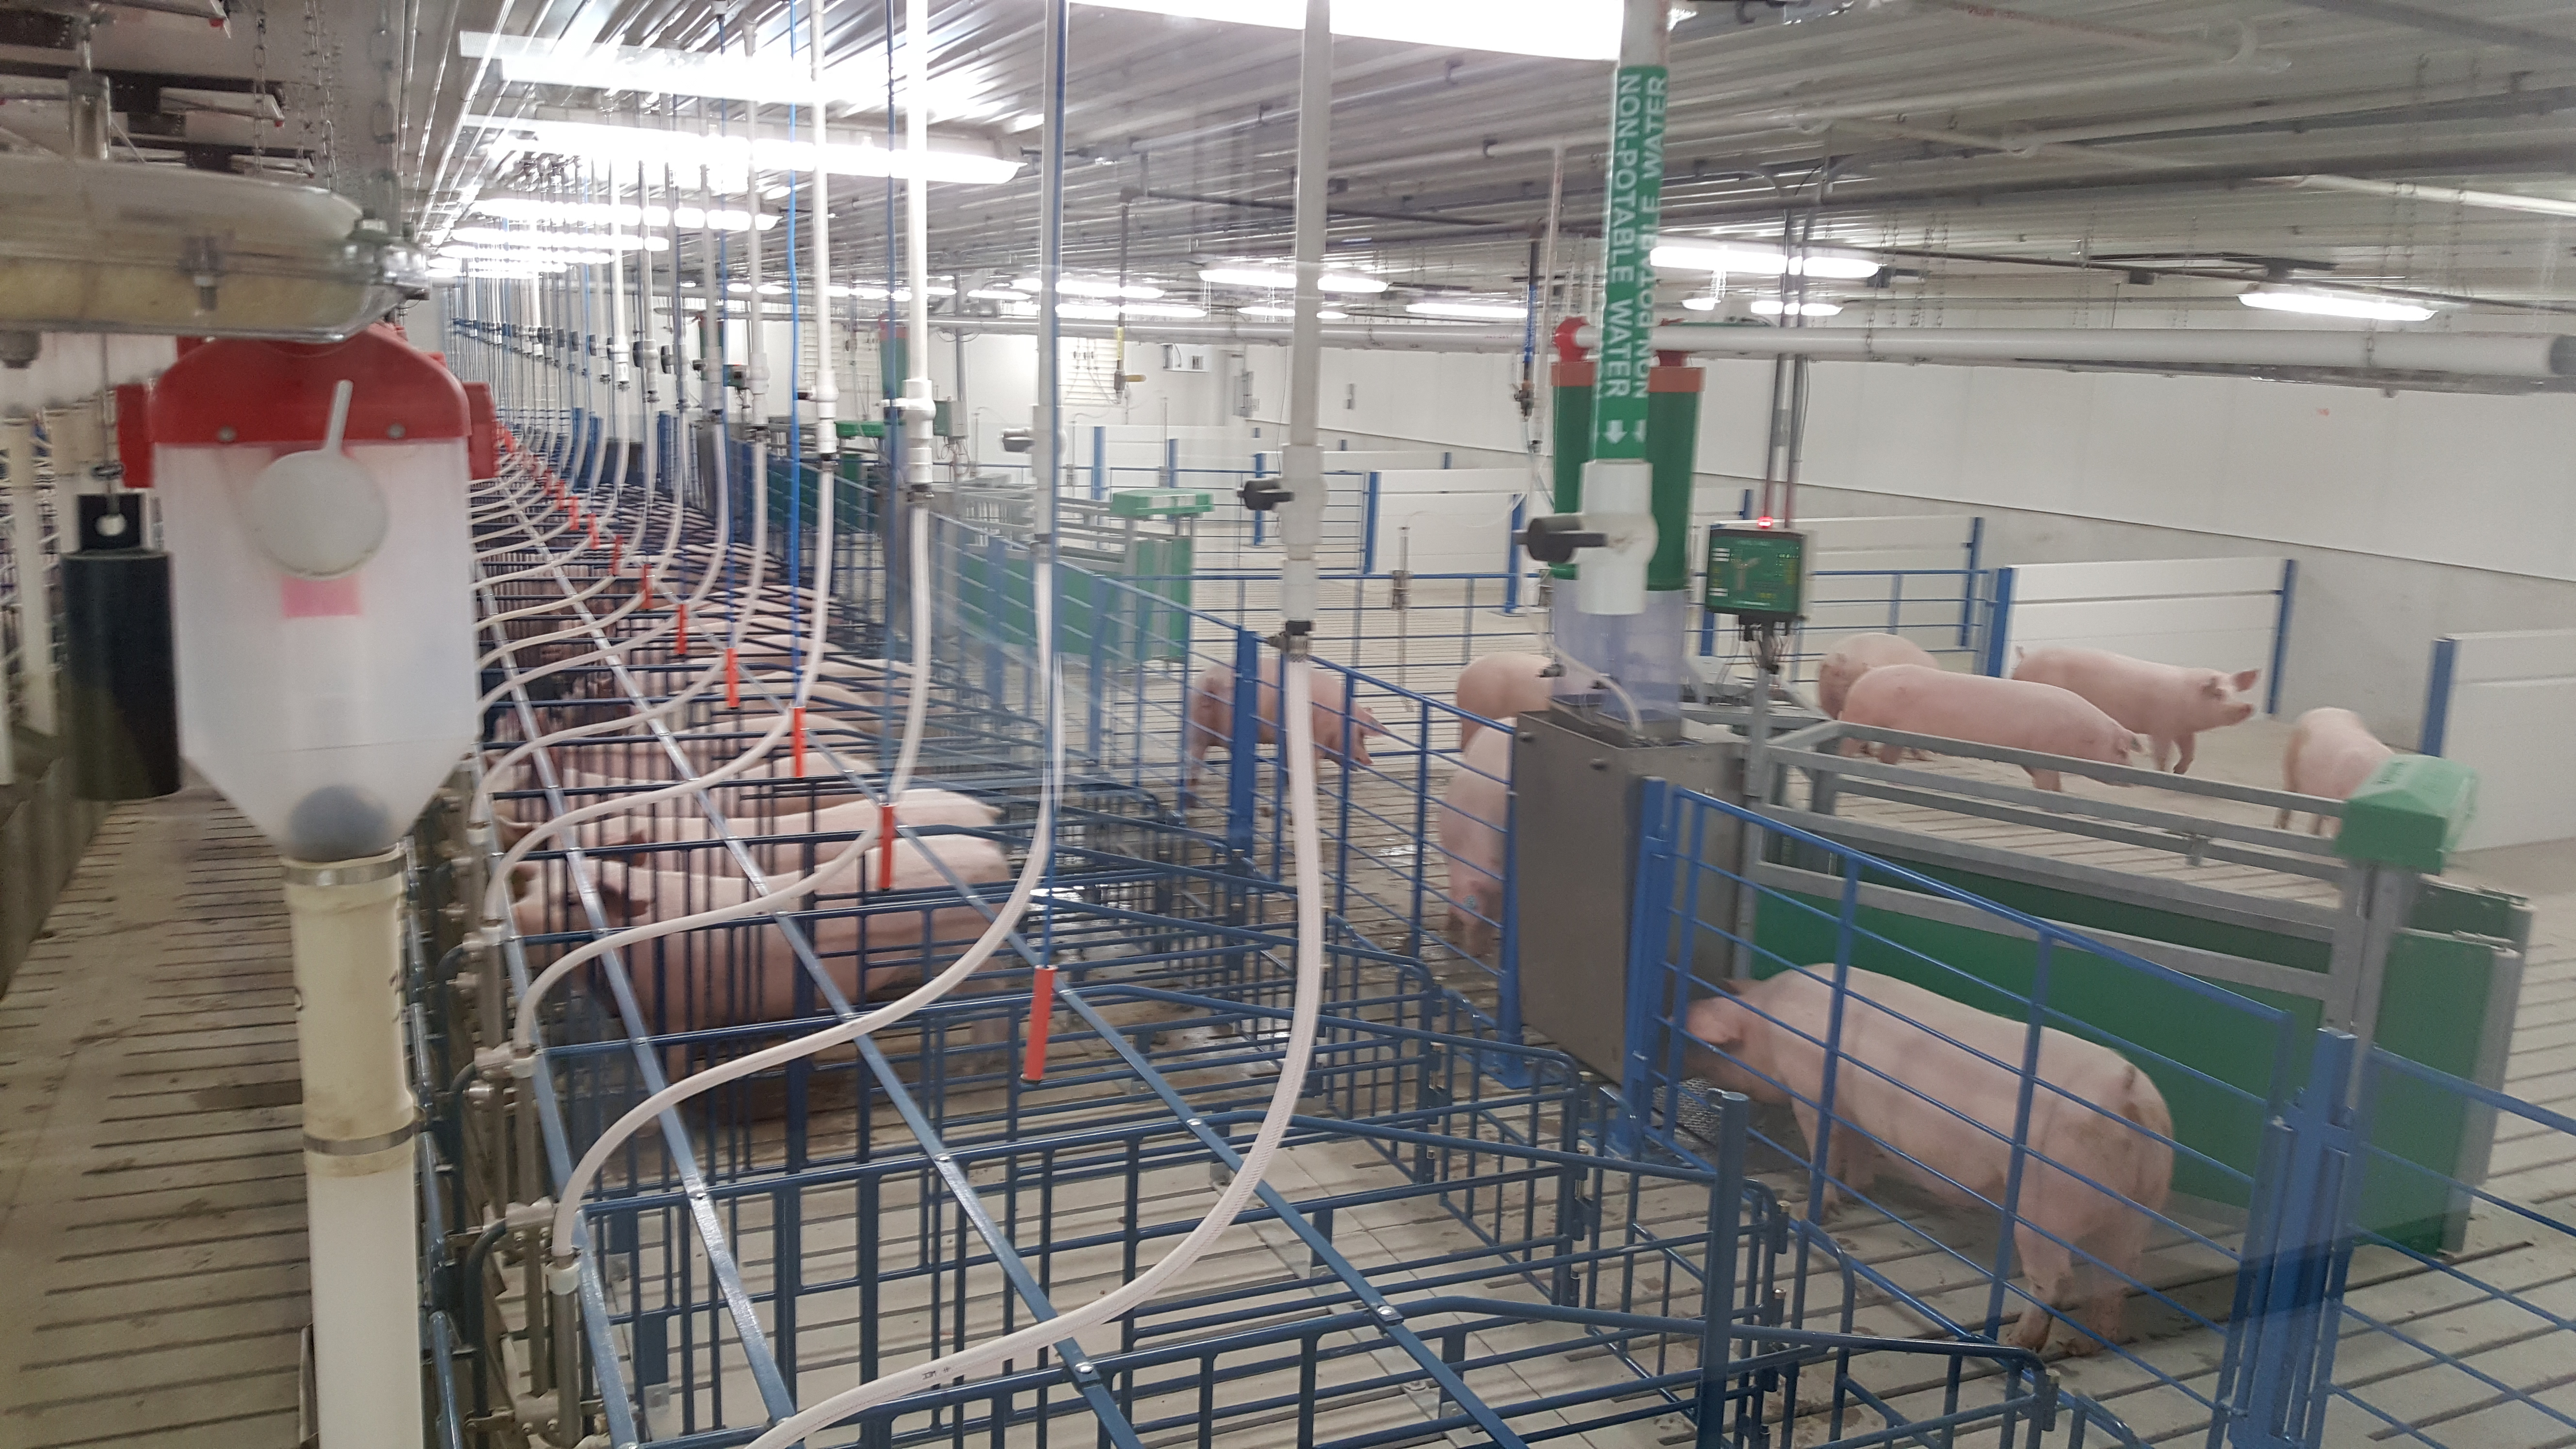 Several rows of sow pens in a swine facility.